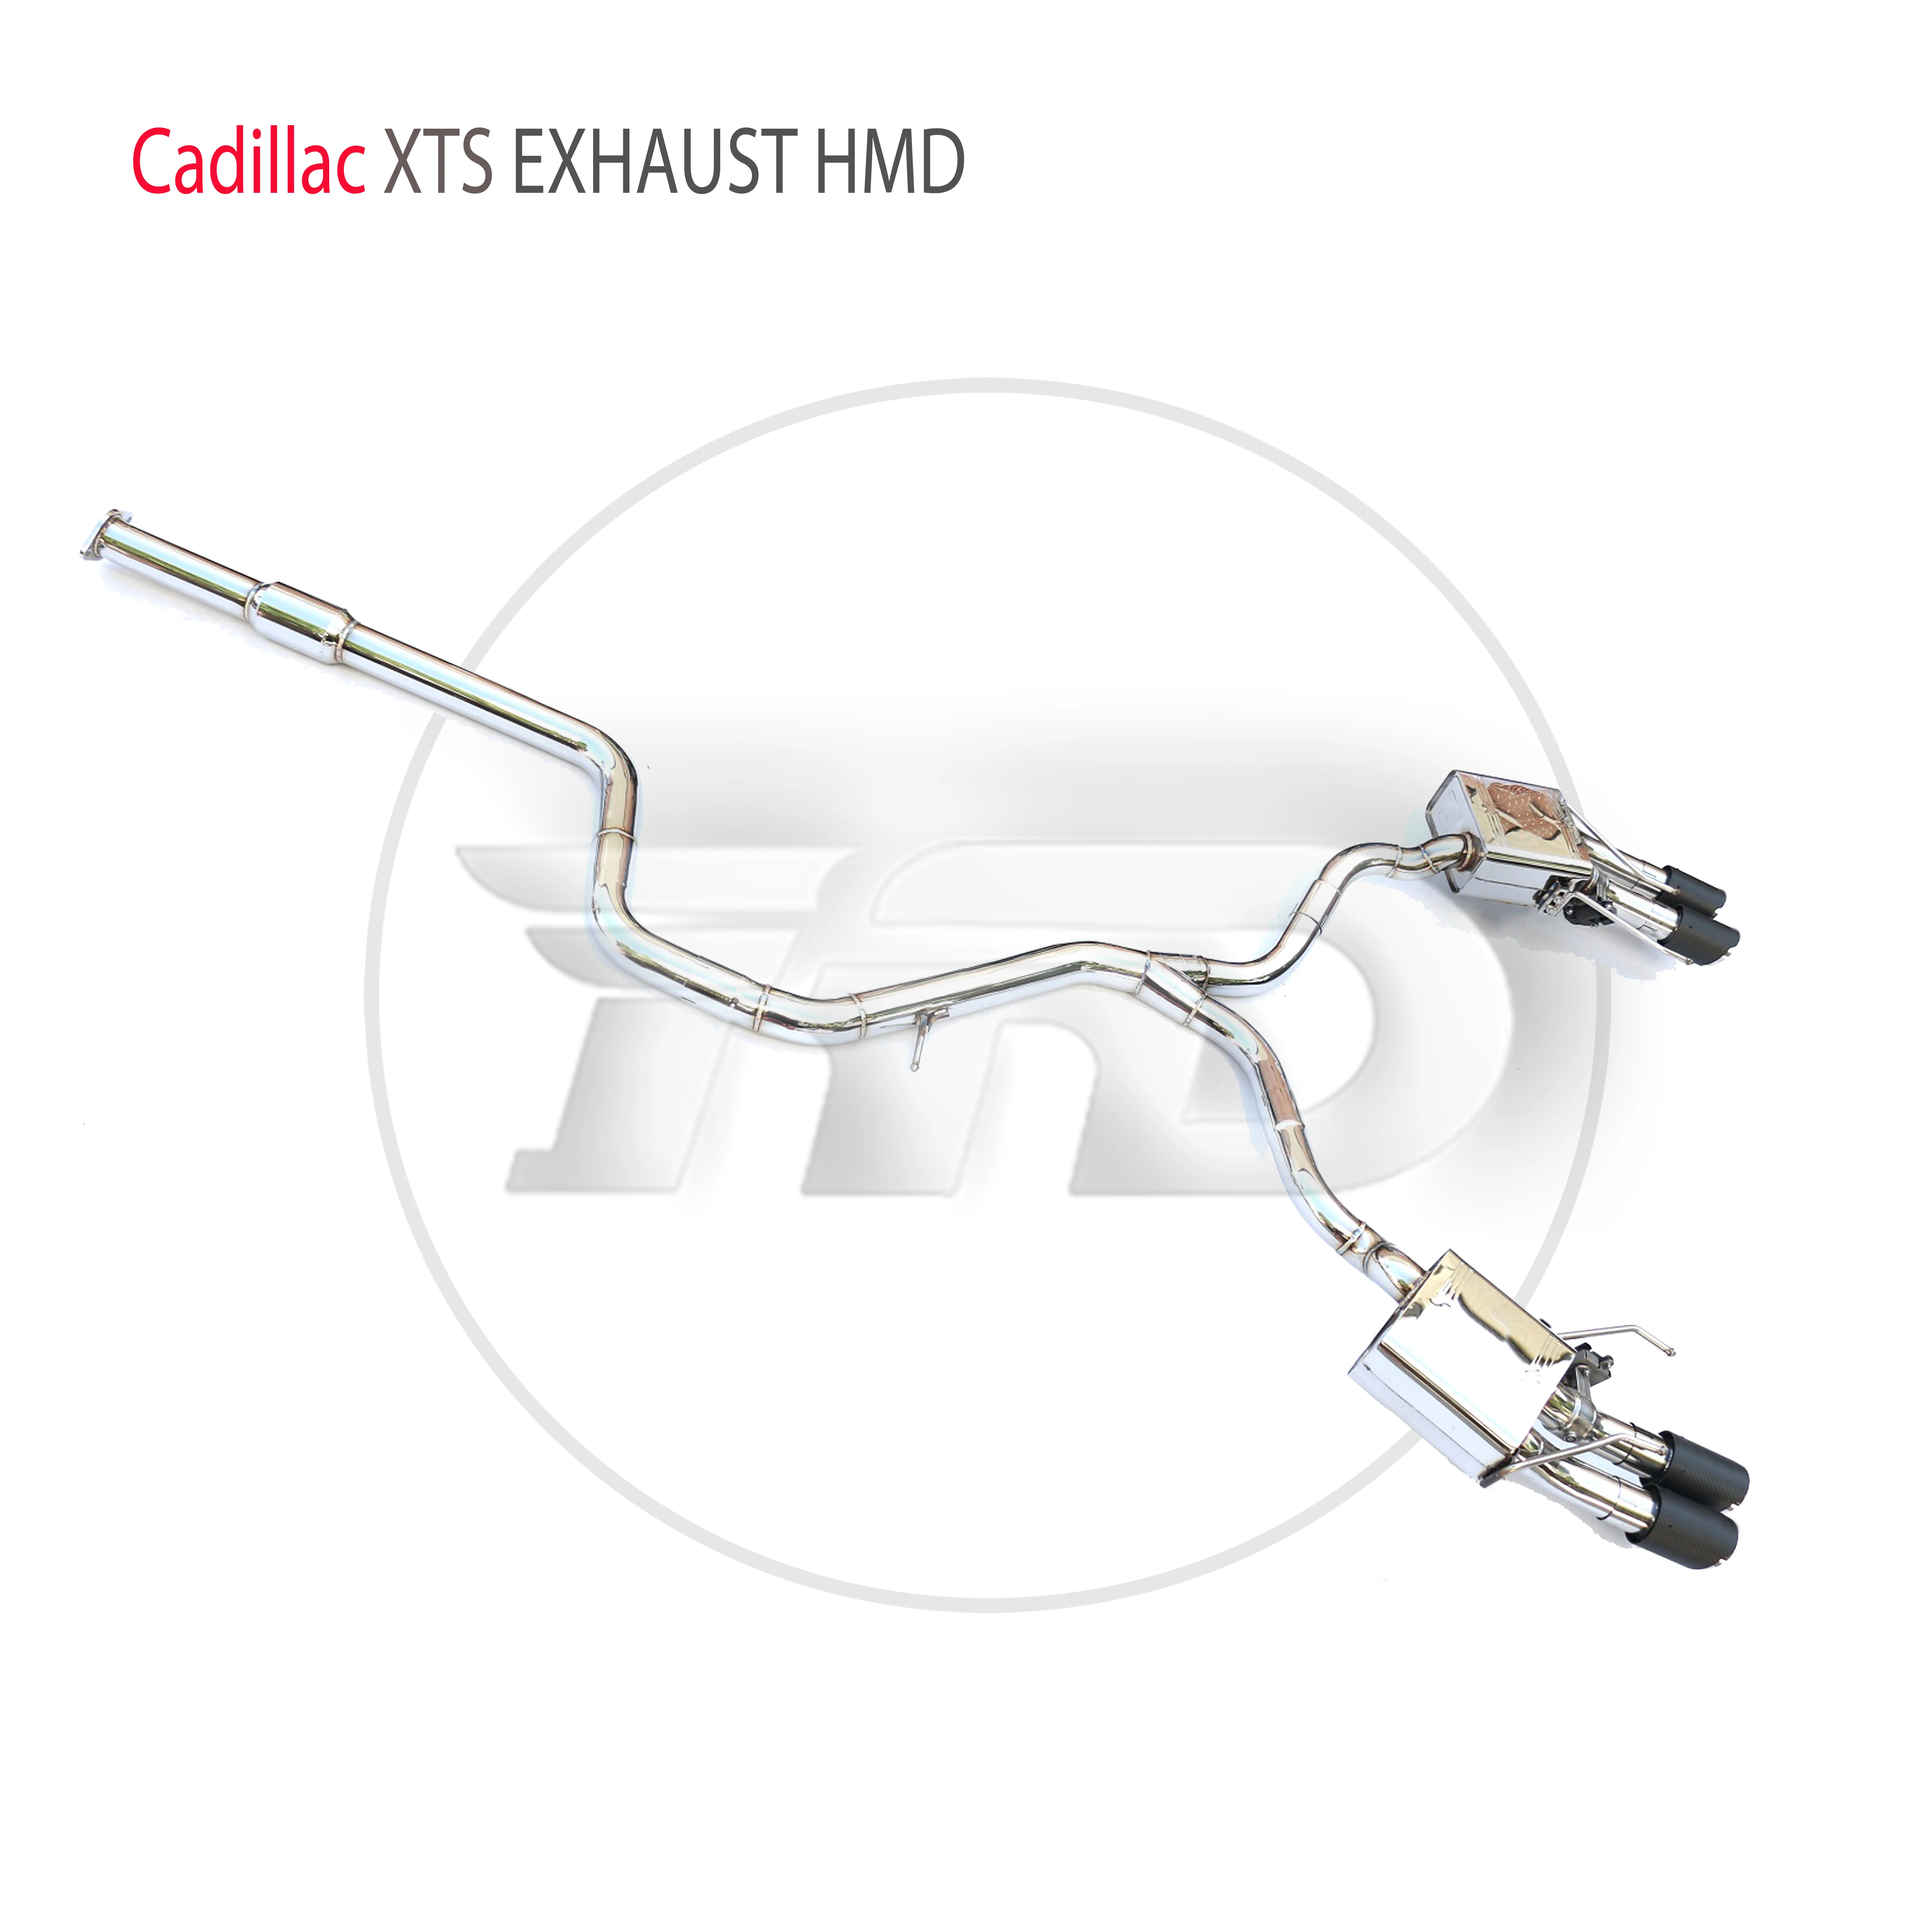 

HMD Stainless Steel Exhaust System Performance Catback is Suitable for Cadillac XTS Car Valve Muffler